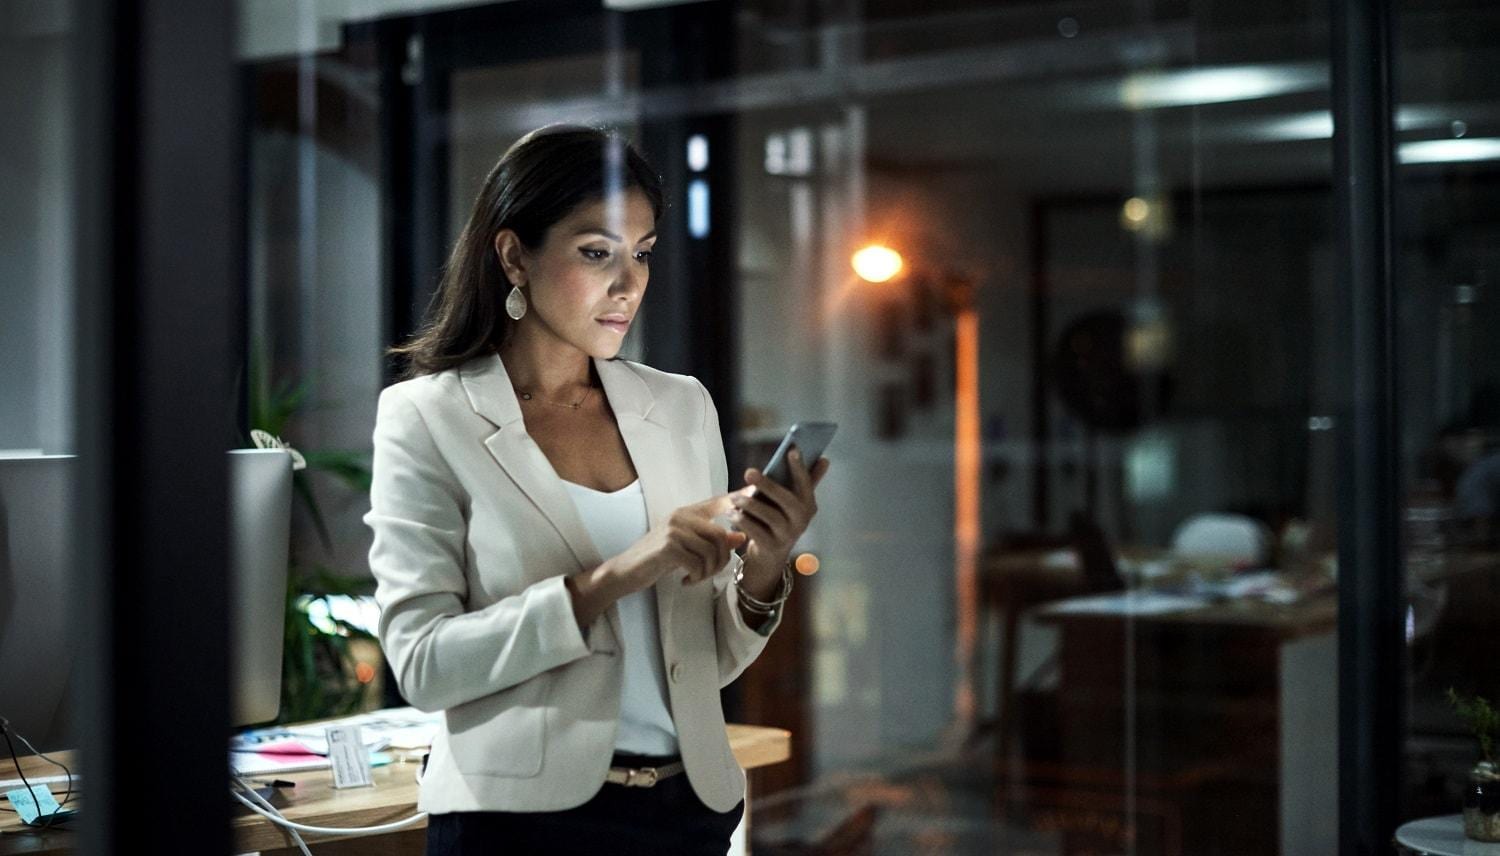 Business Woman Looking at Her Smartphone